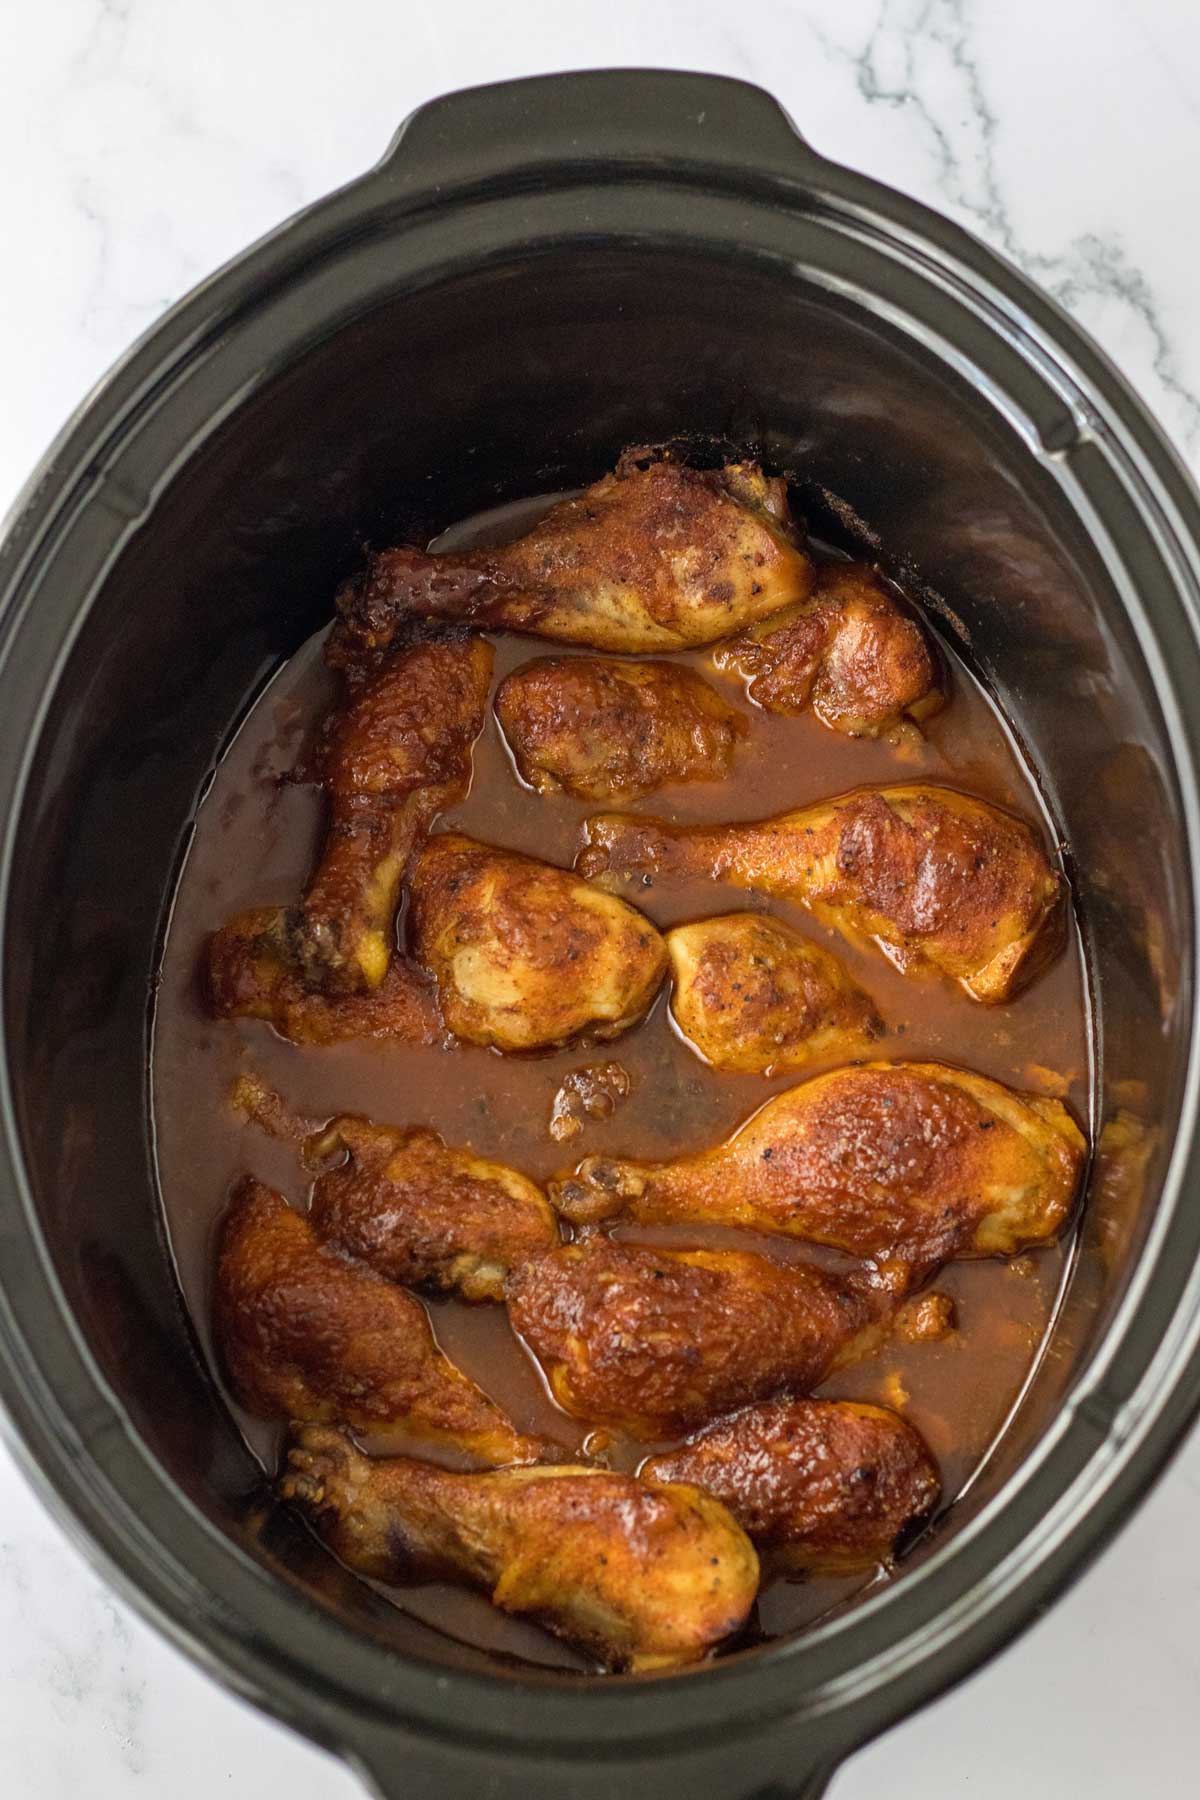 Another process is to cook the Crockpot BBQ Drumsticks on low for low 5-6 hours or high 3-4 hours